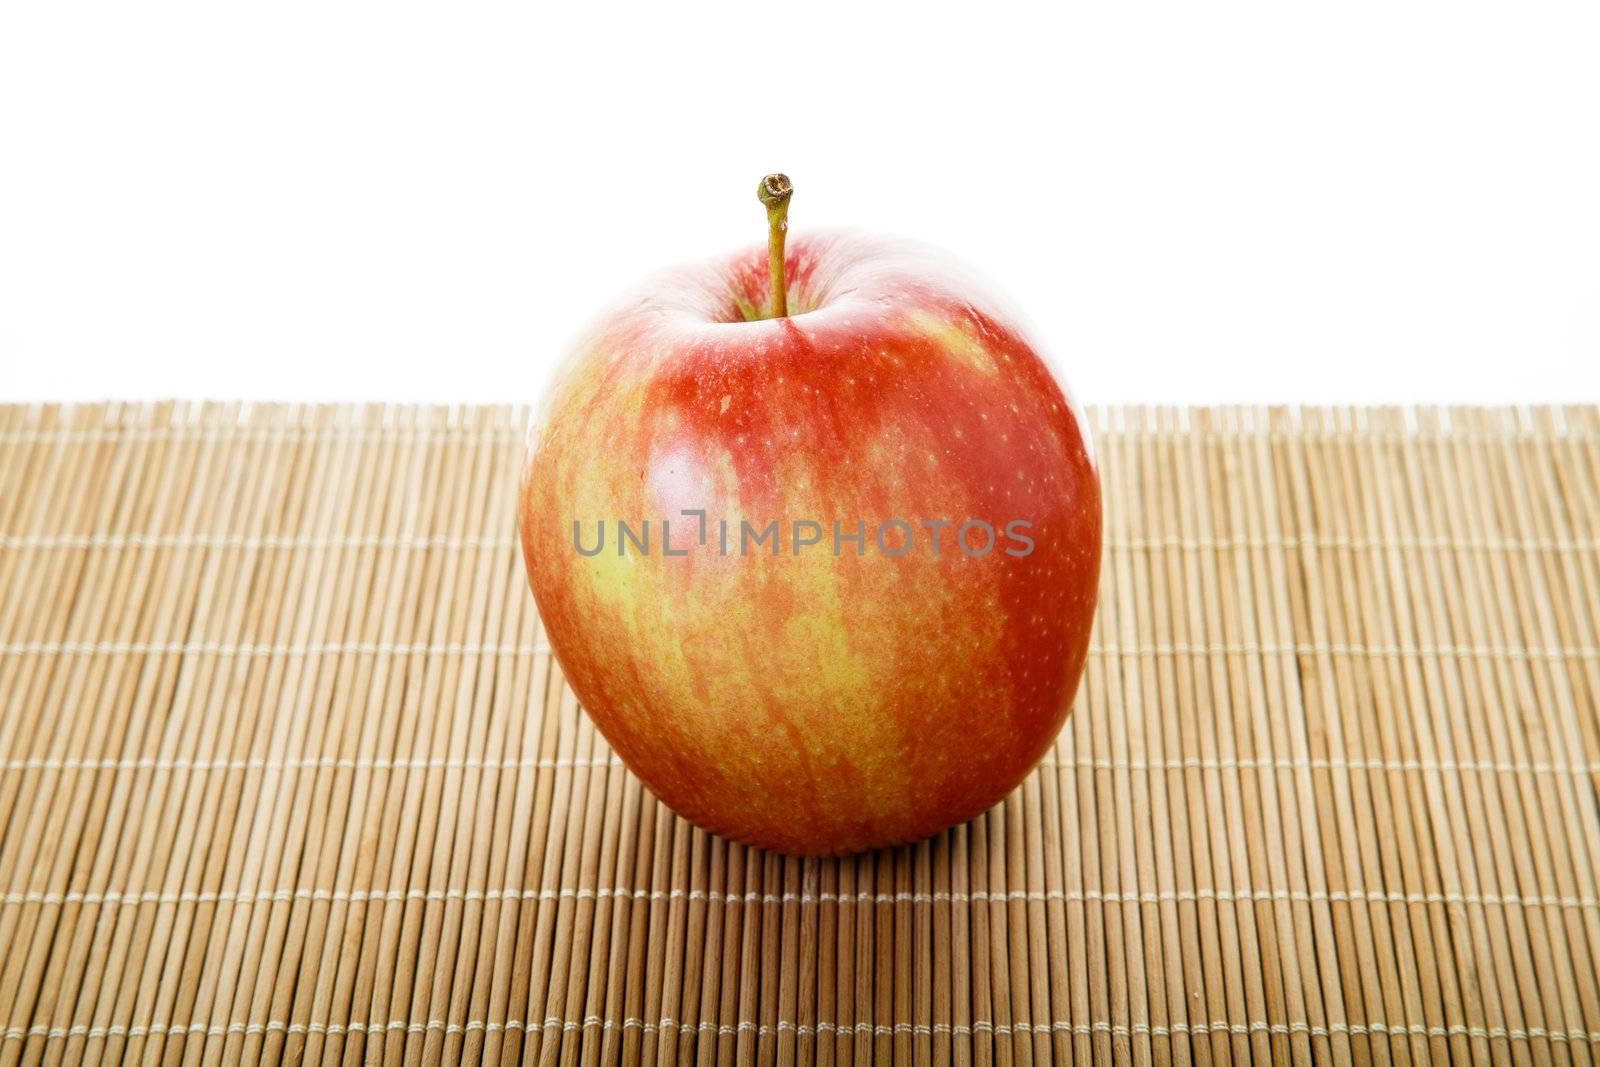 Single red apple on a bamboo mat